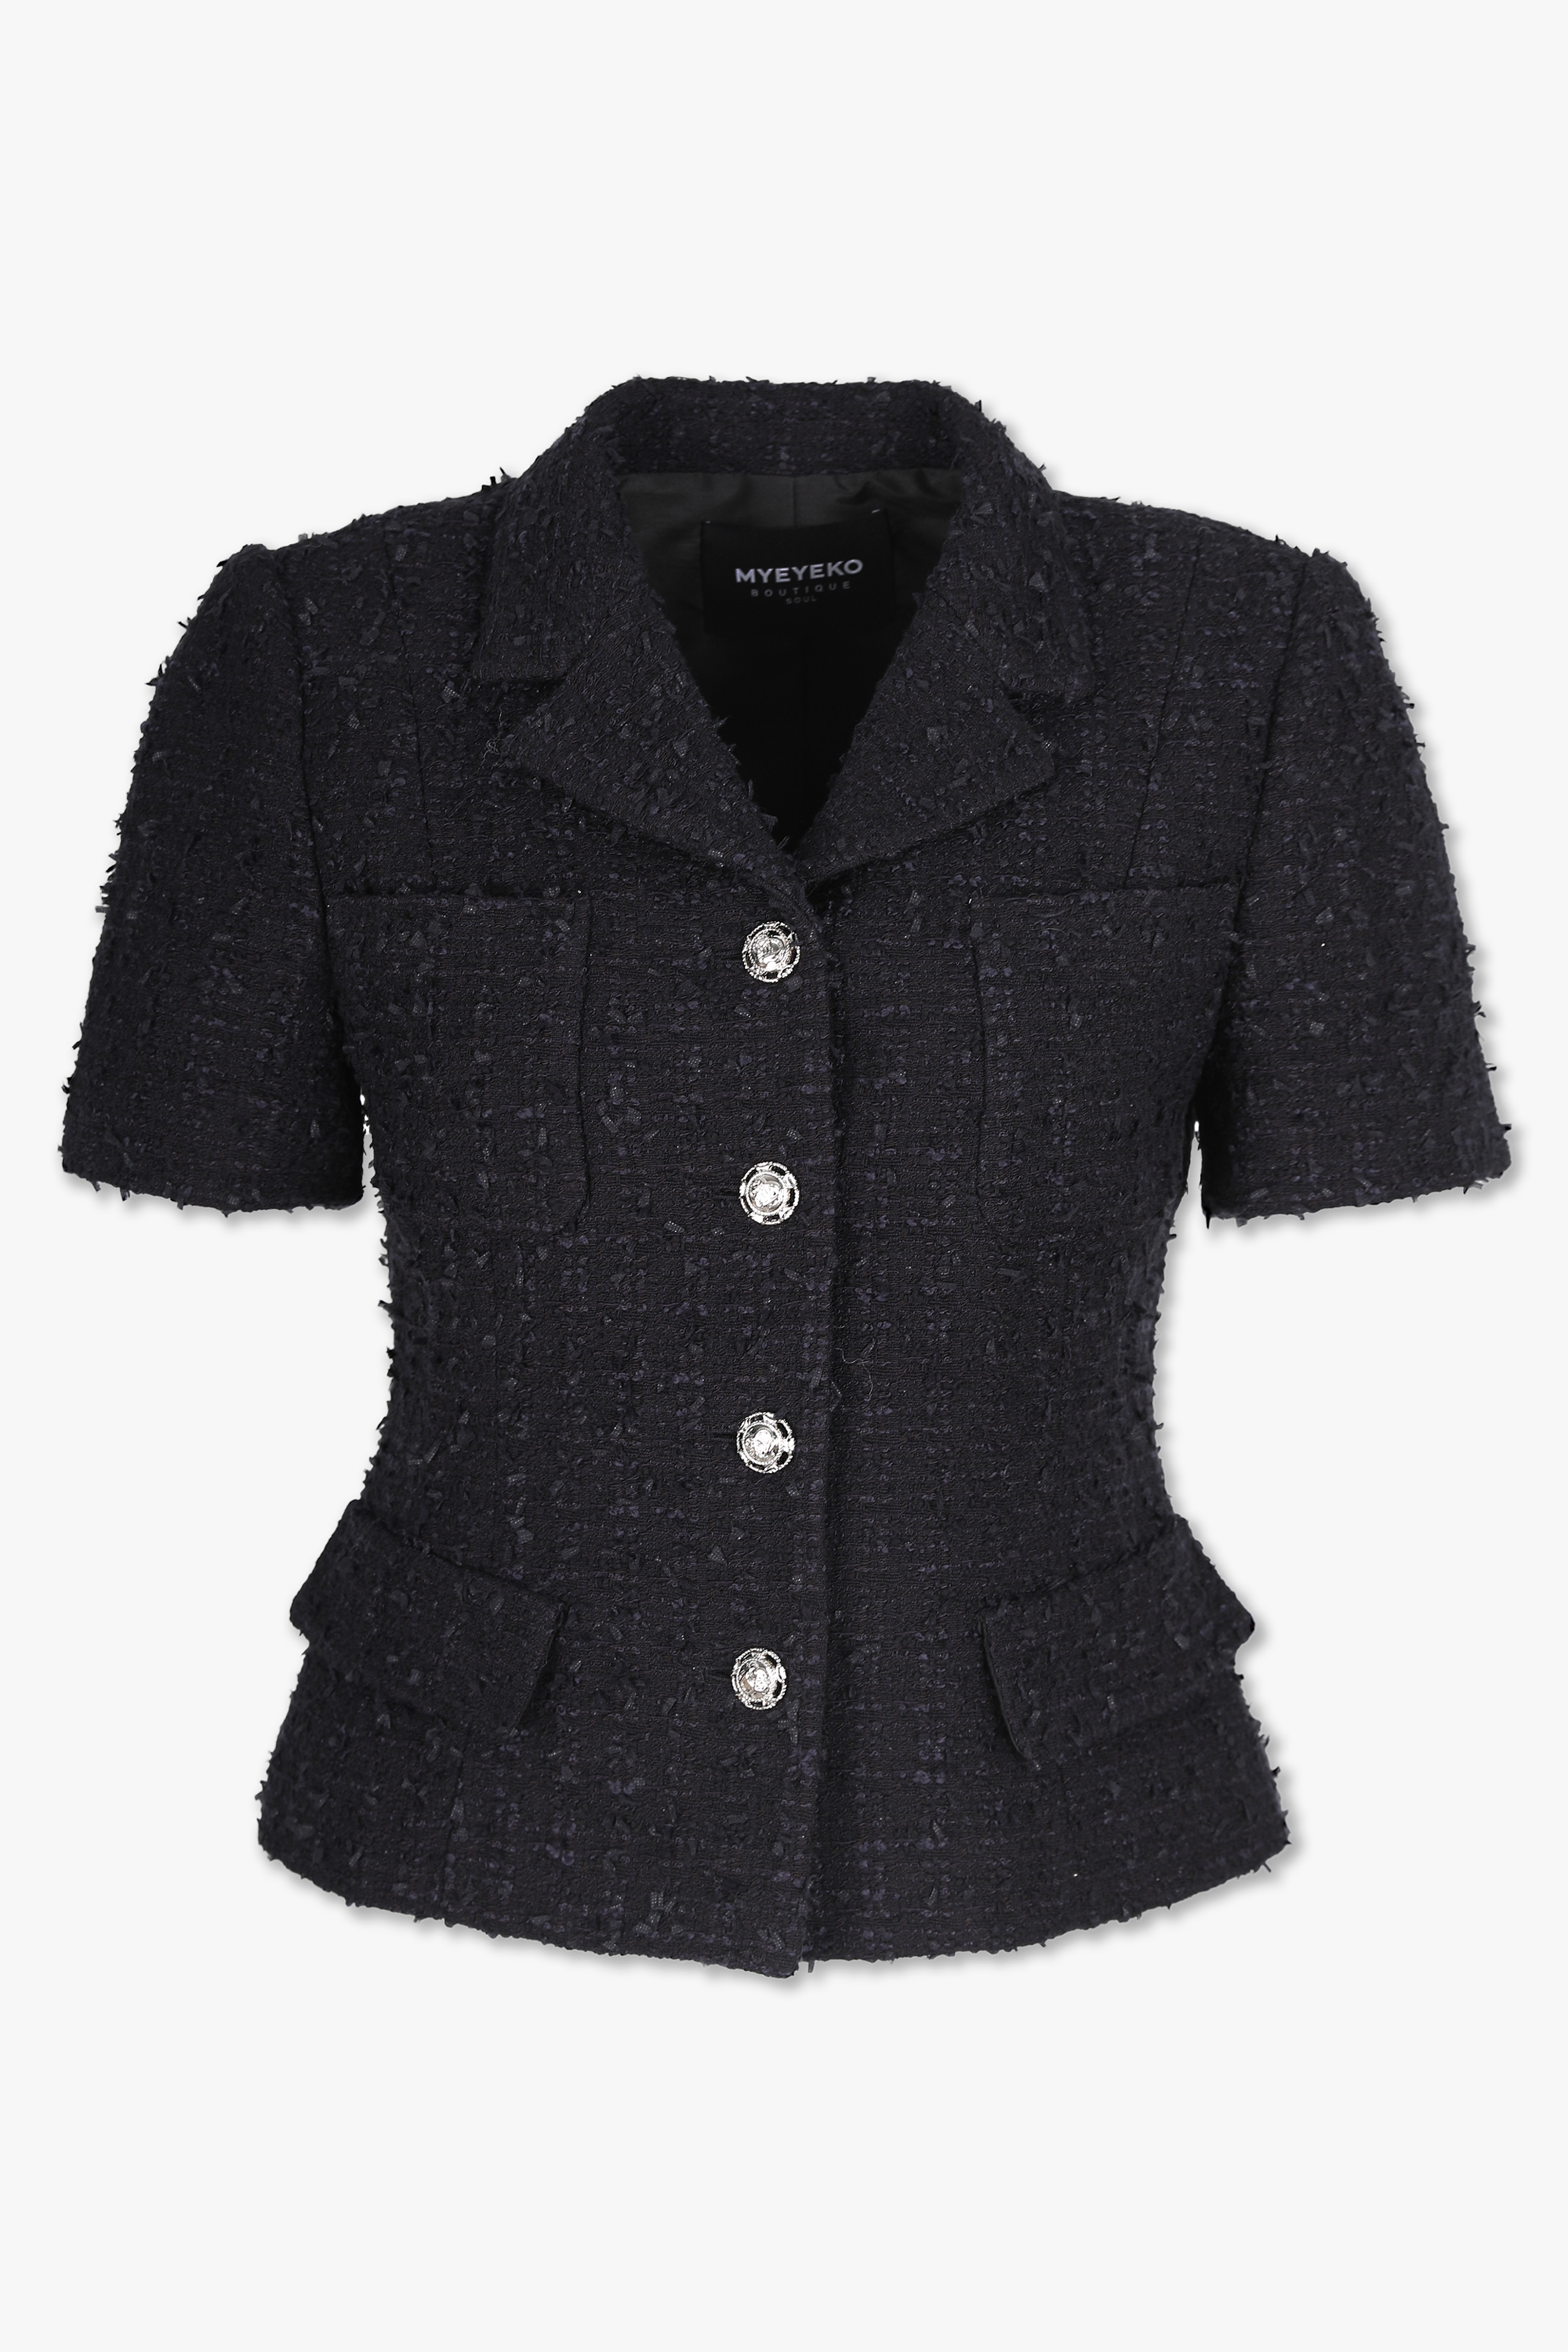 HIGH QUALITY LINE - 23 SPRING/SUMMER - GRACE TWEED JACKET (Fabric by, Made in JAPAN) Deep Navy